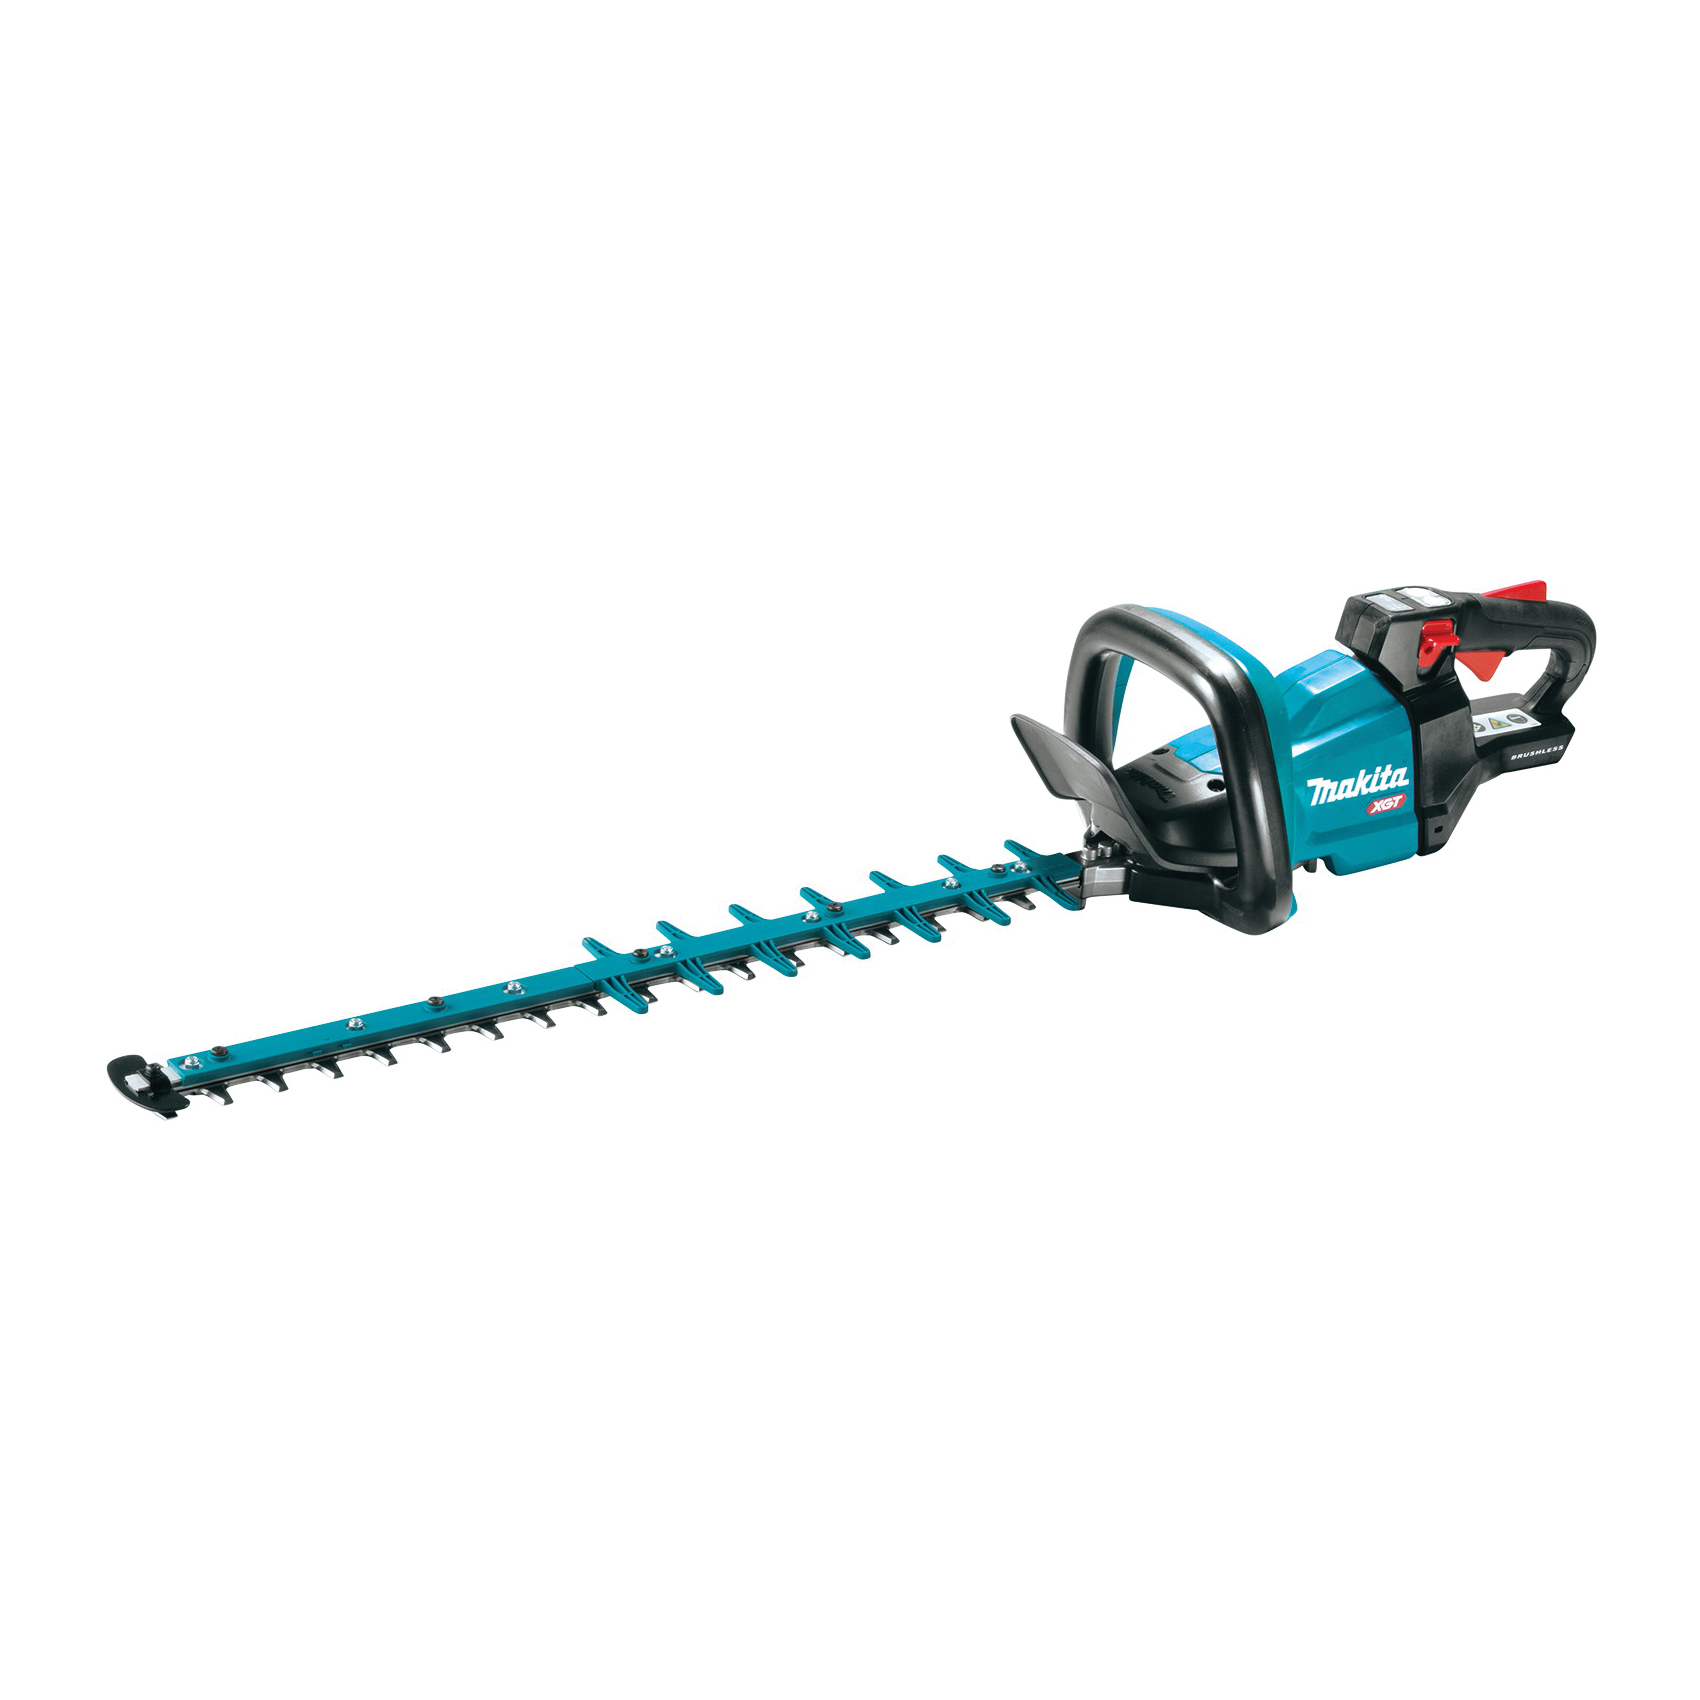 XGT Series GHU02Z Hedge Trimmer, Tool Only, 4 Ah, 40 V, Lithium-Ion, 3/8 in Cutting Capacity, 24 in Blade